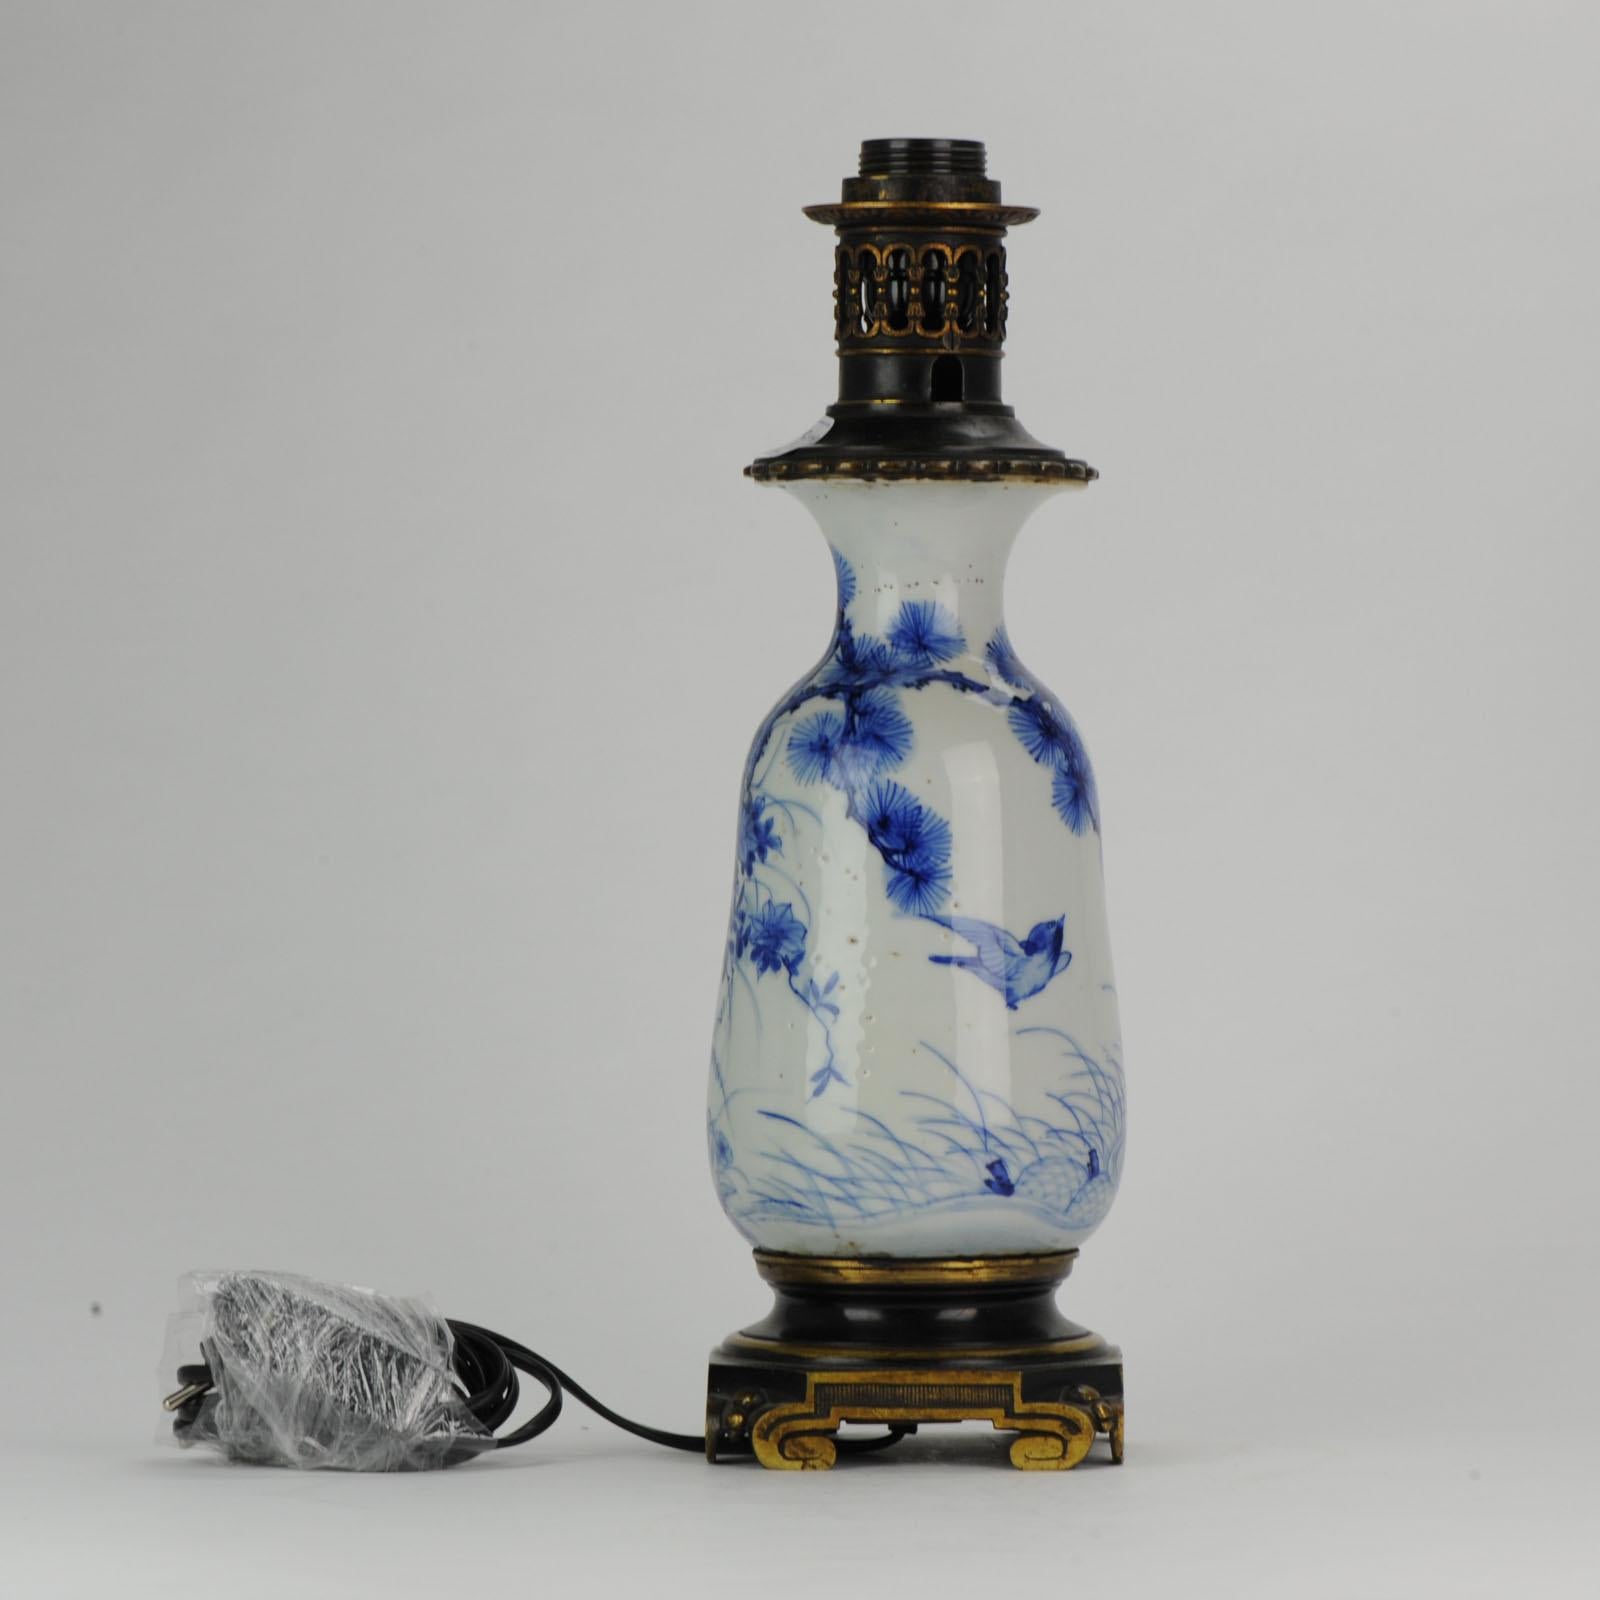 Lovely Antique Lamp Vase with Birds and Turtles Japan Meiji In Good Condition For Sale In Amsterdam, Noord Holland